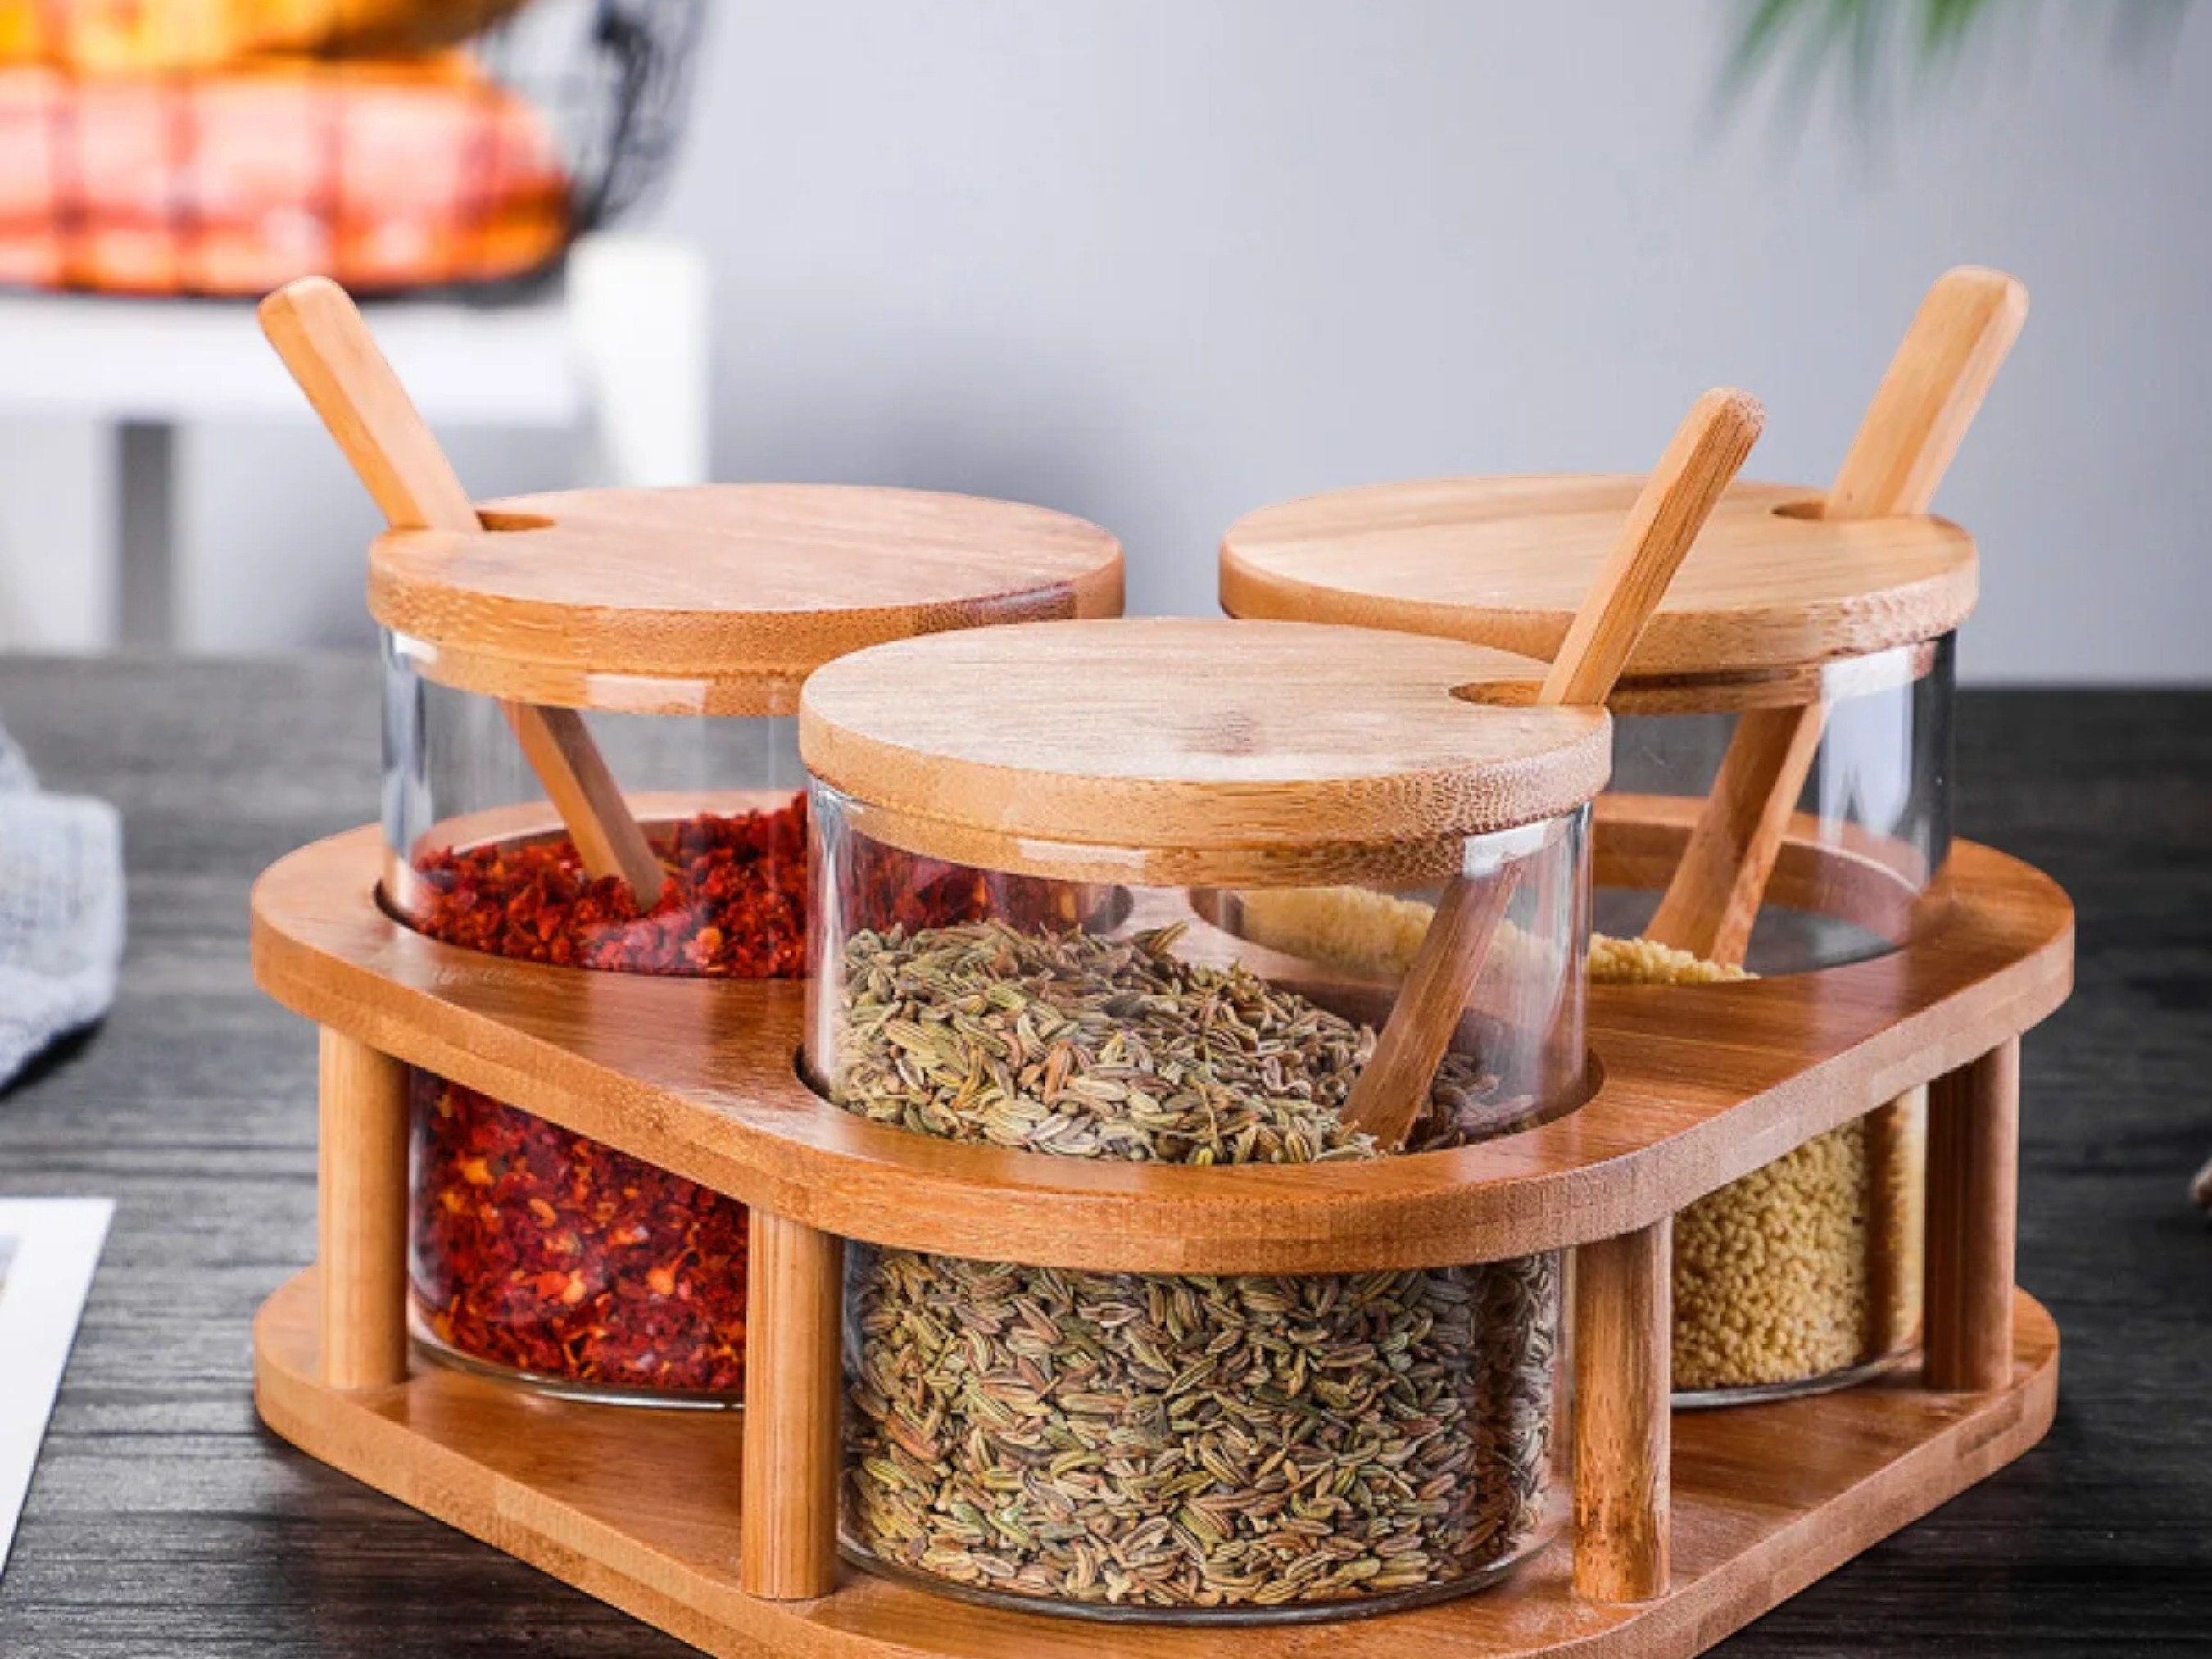 spice jars with spoon, spice jars with spoon Suppliers and Manufacturers at